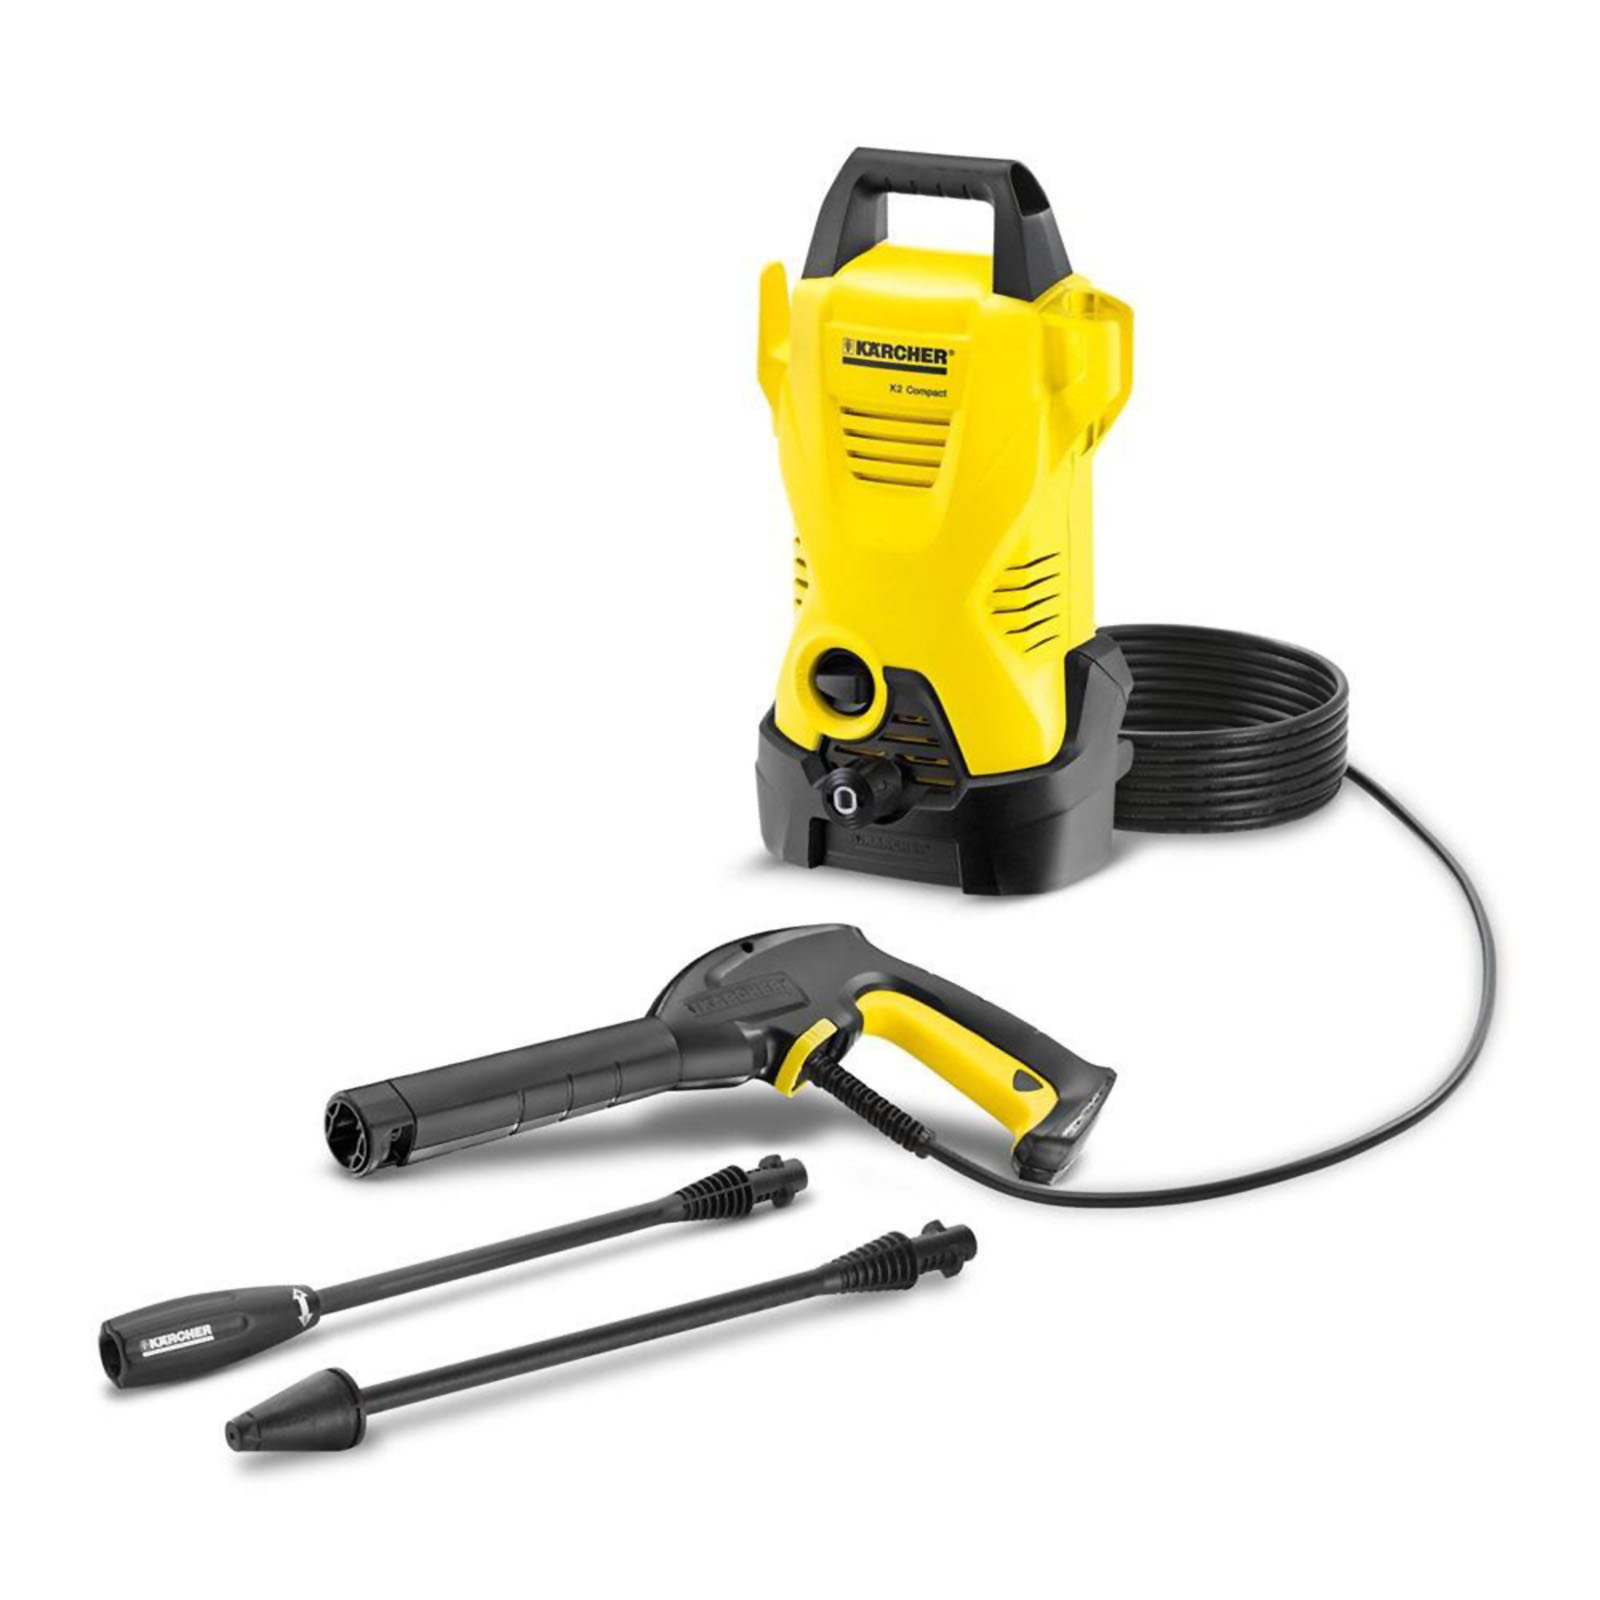 Karcher 16021140 1600psi 1.25GPM Compact Electric Pressure Washer